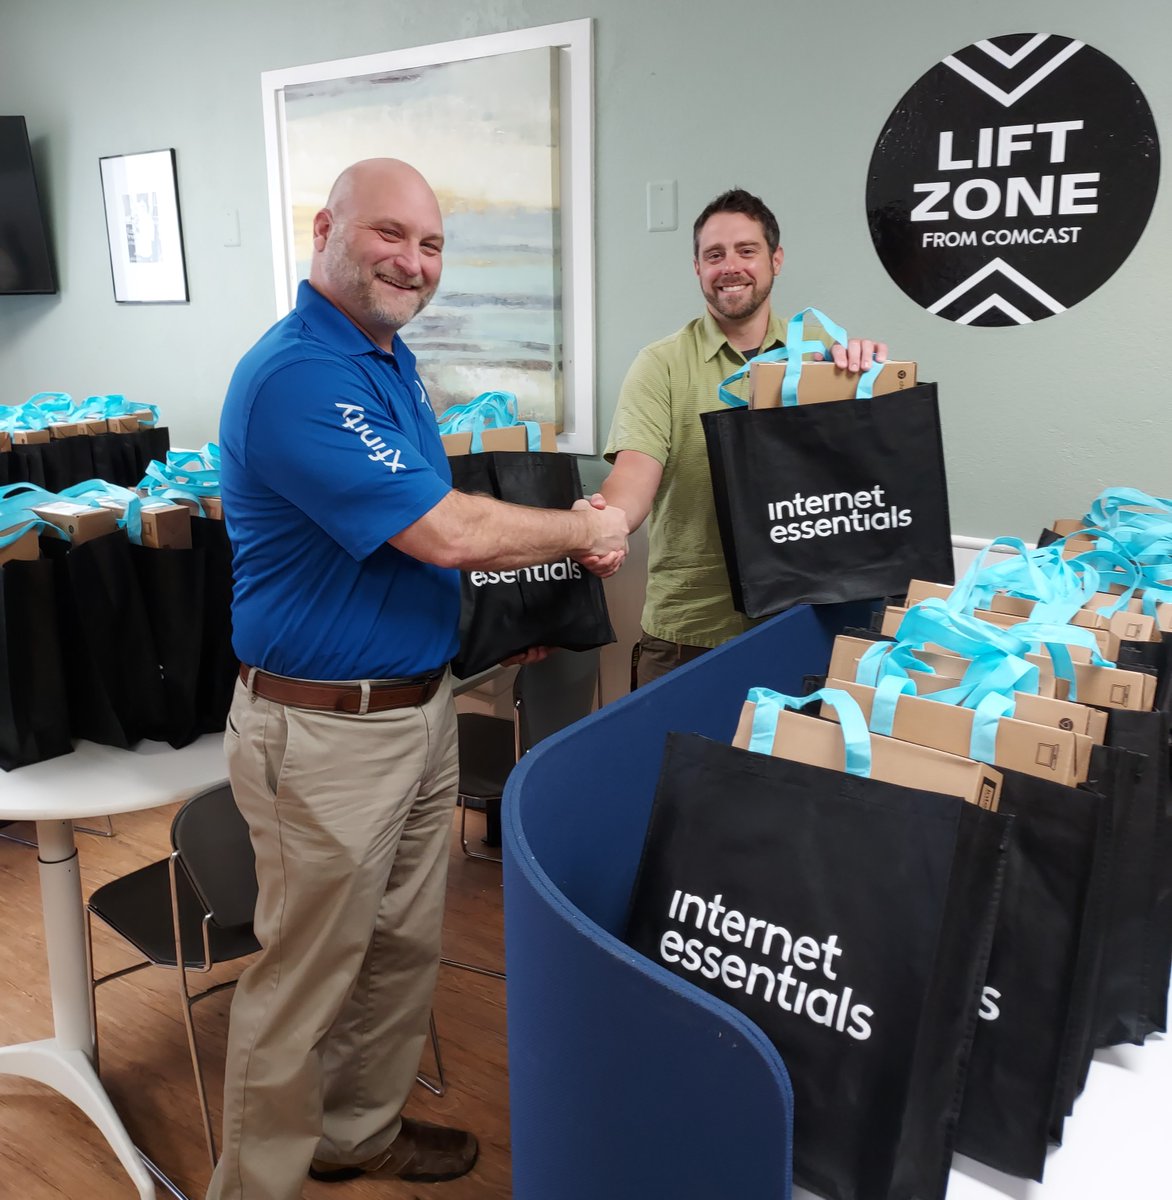 Being part of the community means keeping our partnerships with community organizations strong. We’re proud to continue our partnership with @SpokaneFP by donating free laptops to advance digital equity in Spokane and help Family Promise end the cycle of homelessness in the area.